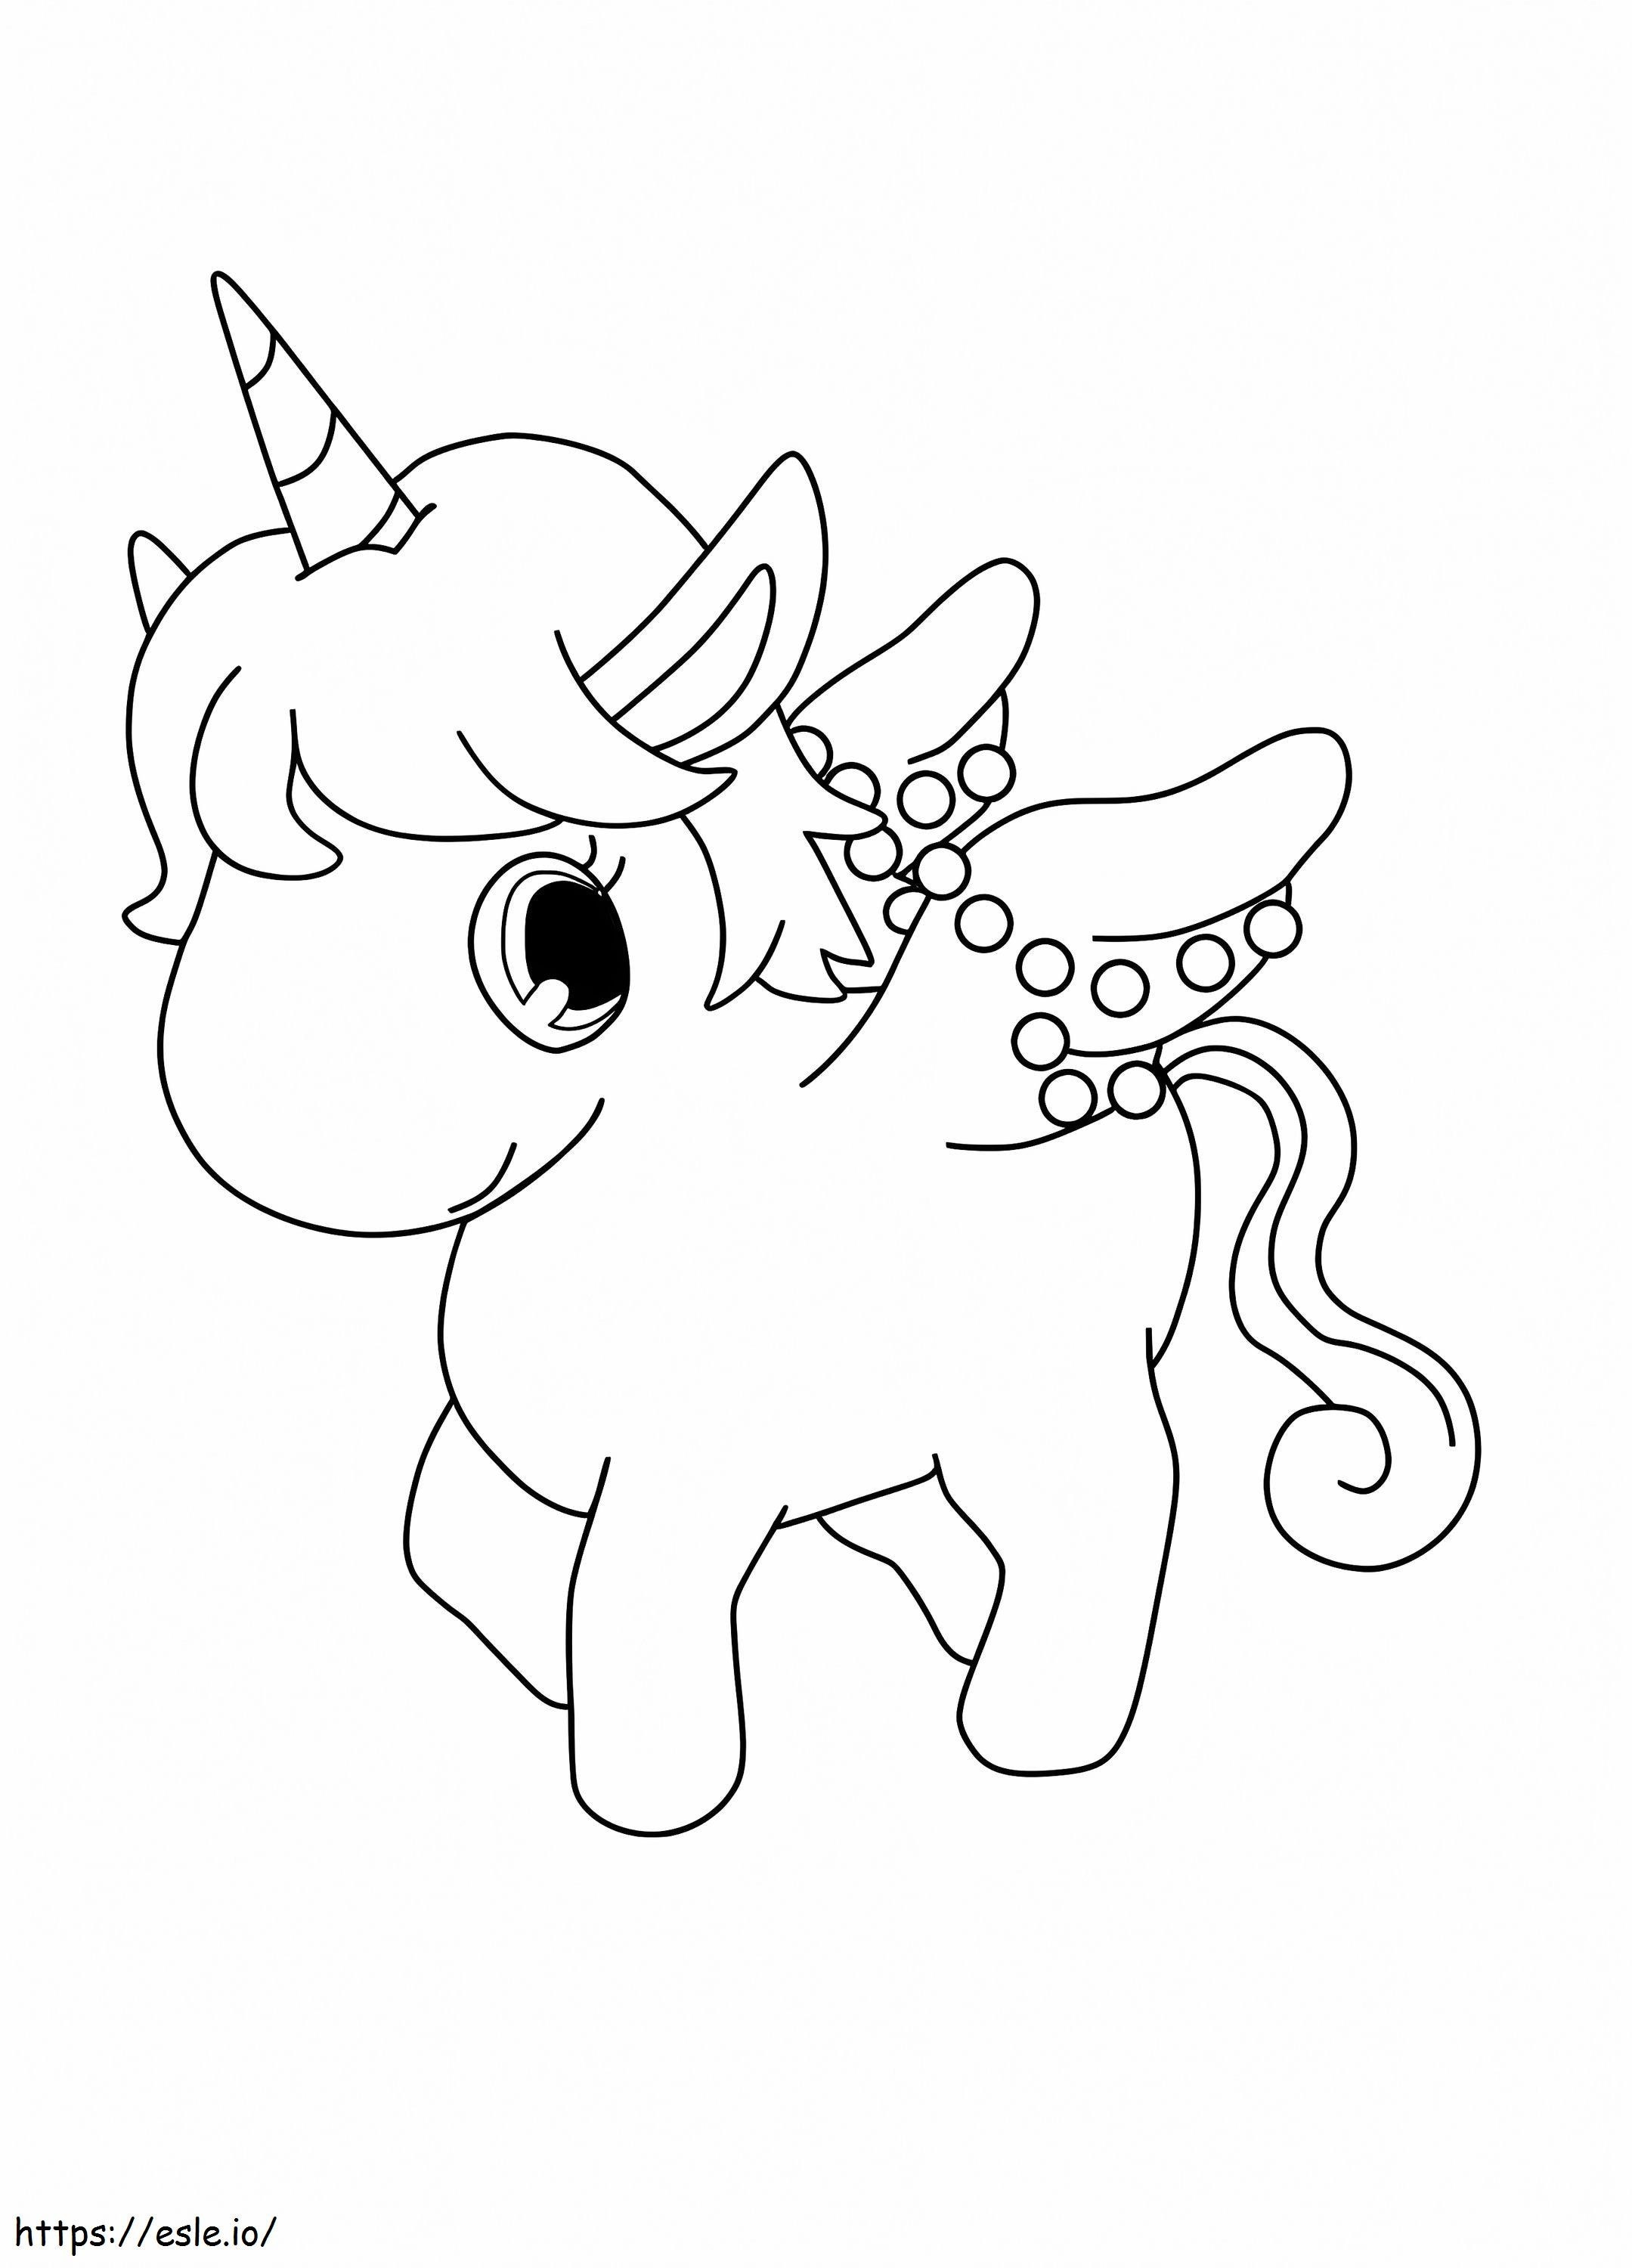 Jewelpets 2 coloring page